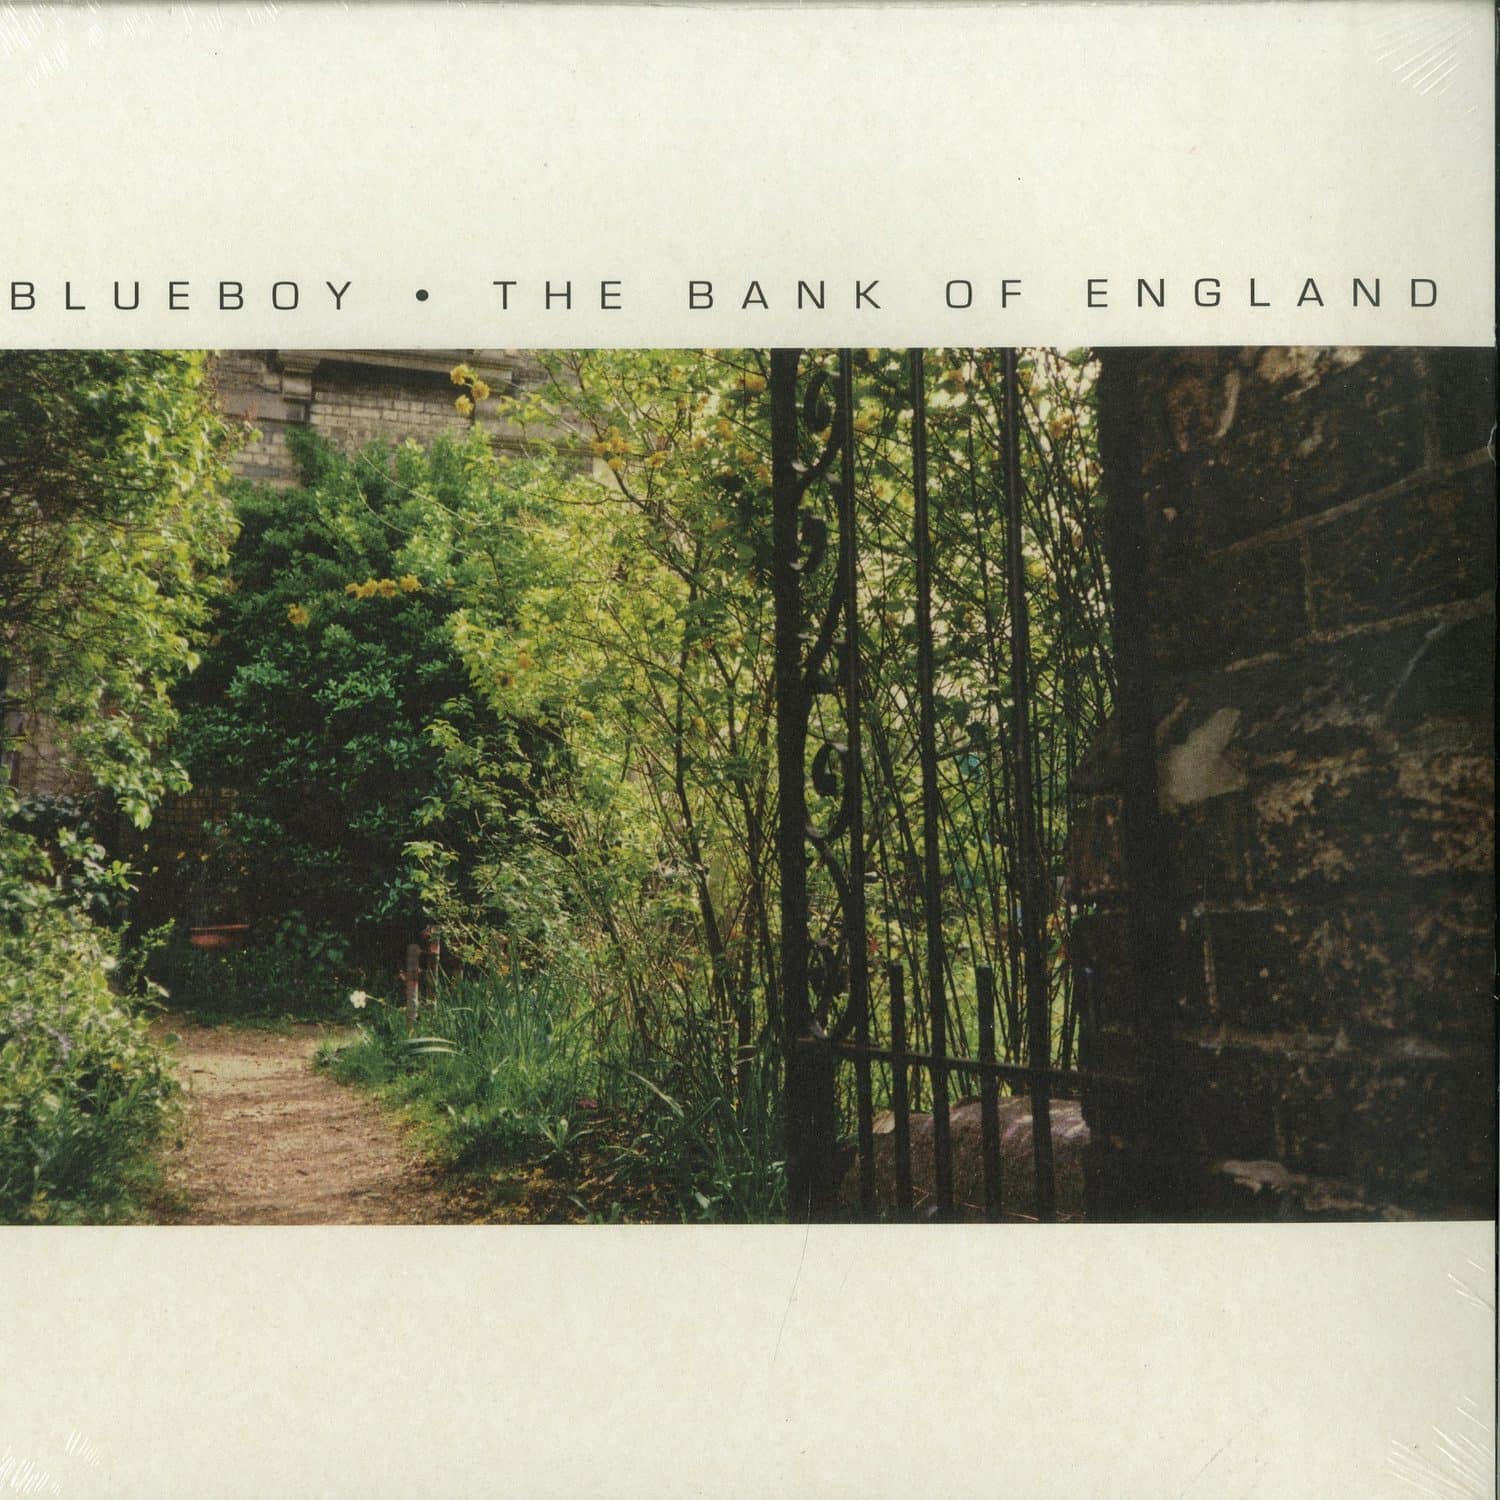 Blueboy - THE BANK OF ENGLAND 